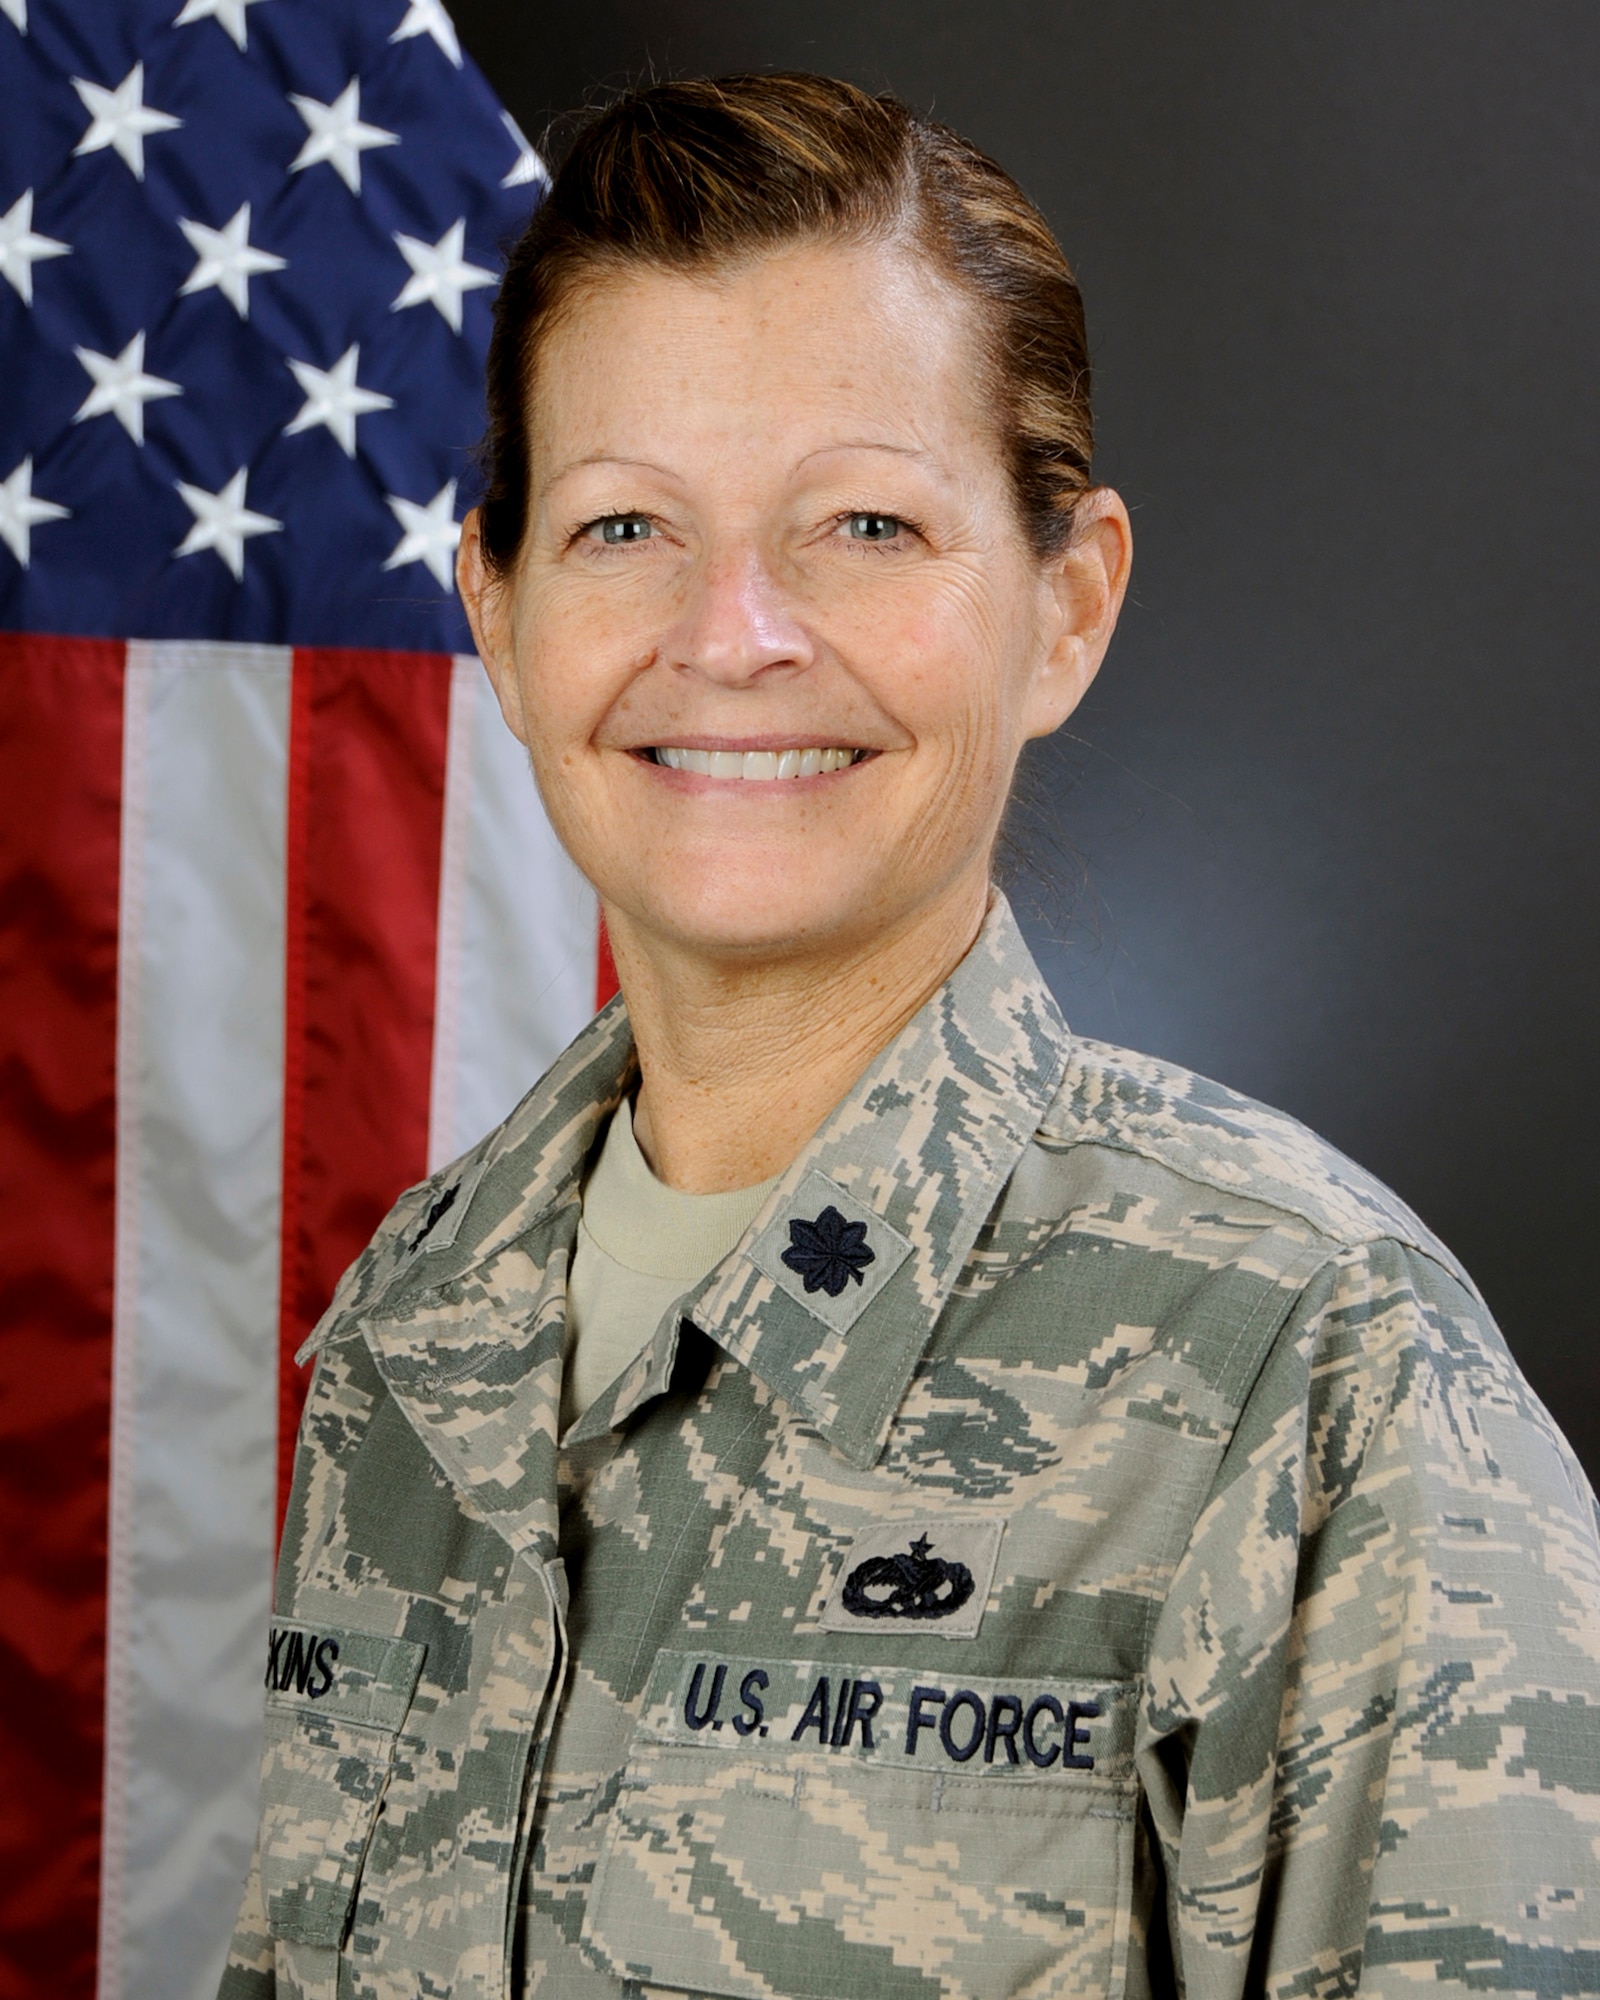 U.S. Air Force Lt. Col. Sharilyn Askins, commander of the 169th Aircraft Maintenance Squadron at McEntire Joint National Guard Base, South Carolina Air National Guard, Jan. 22, 2016.  (U.S. Air National Guard photo by Airman 1st Class Megan Floyd)